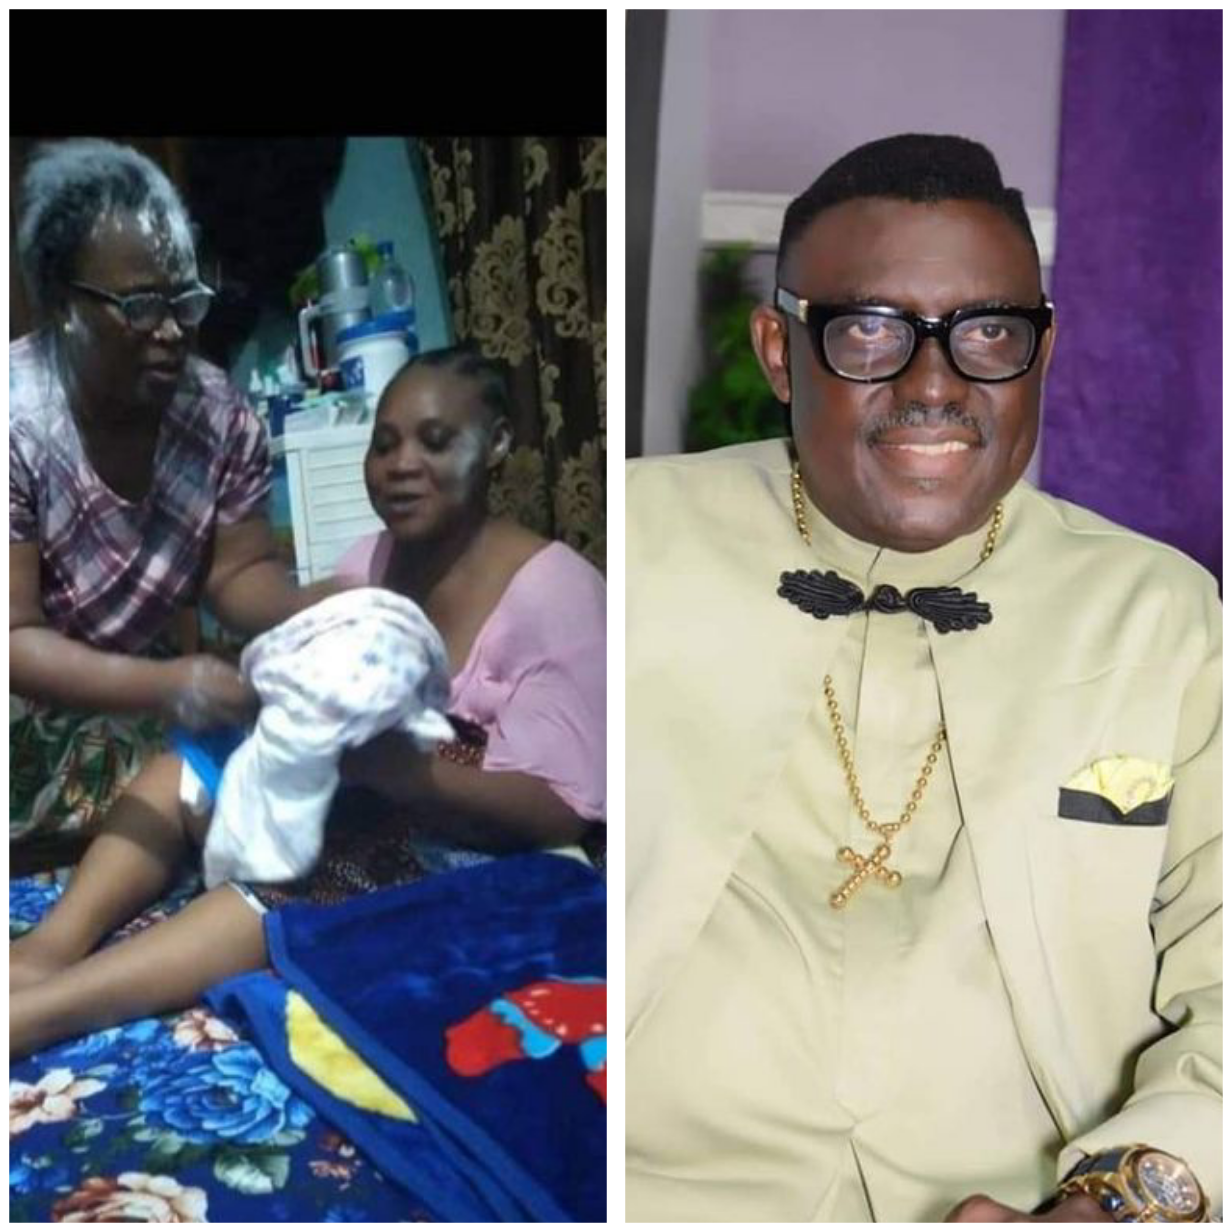 Nigerian Gospel artiste, Quincy Tebite Dtisio and his wife welcome a baby after 27 years of marriage 